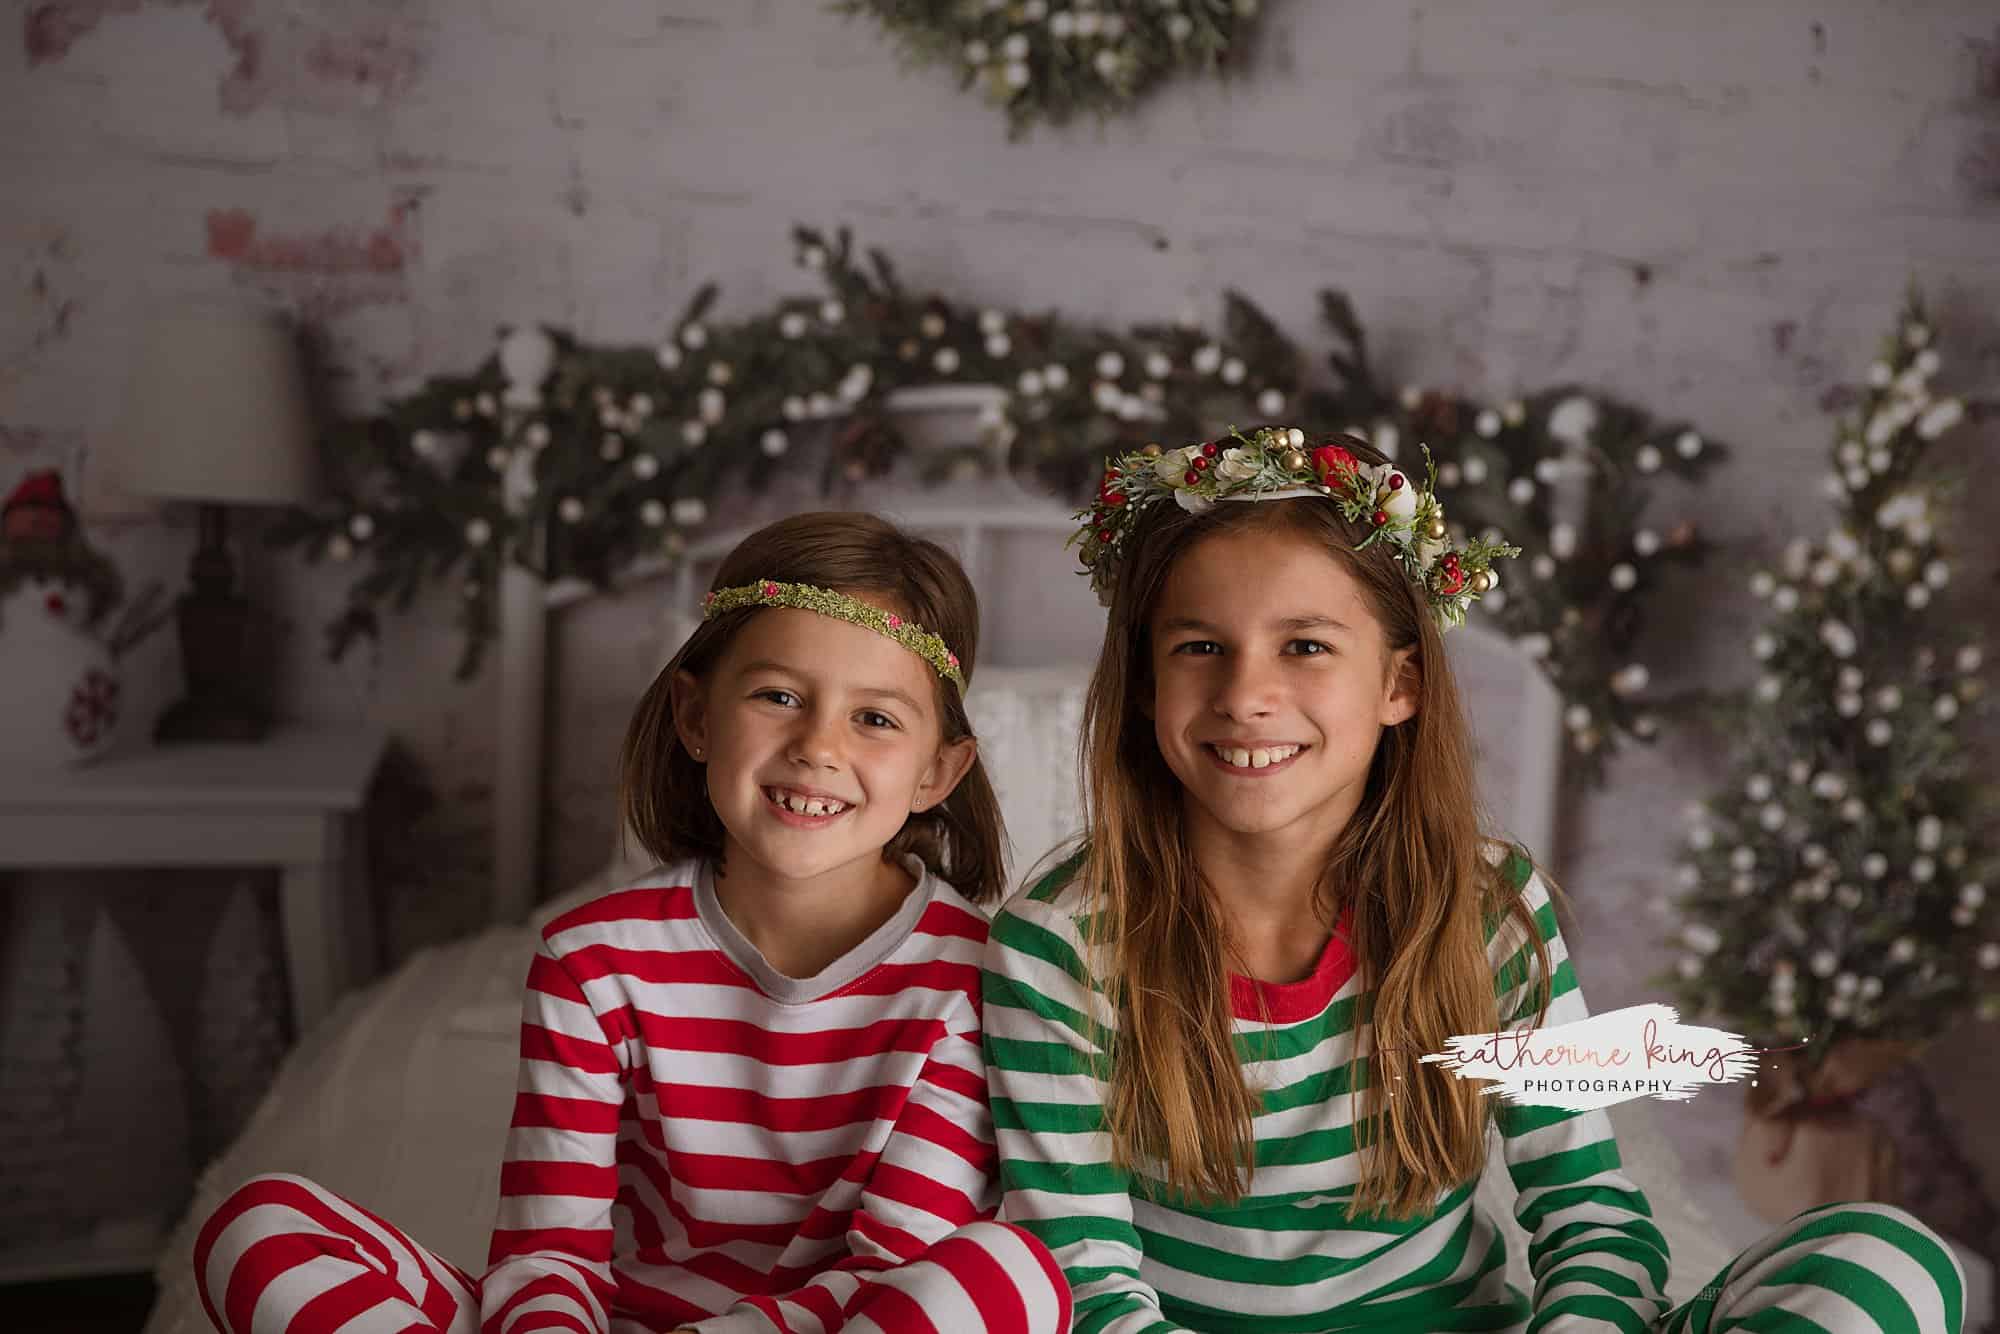 2021 Holiday Mini Photography Sessions in Madison CT